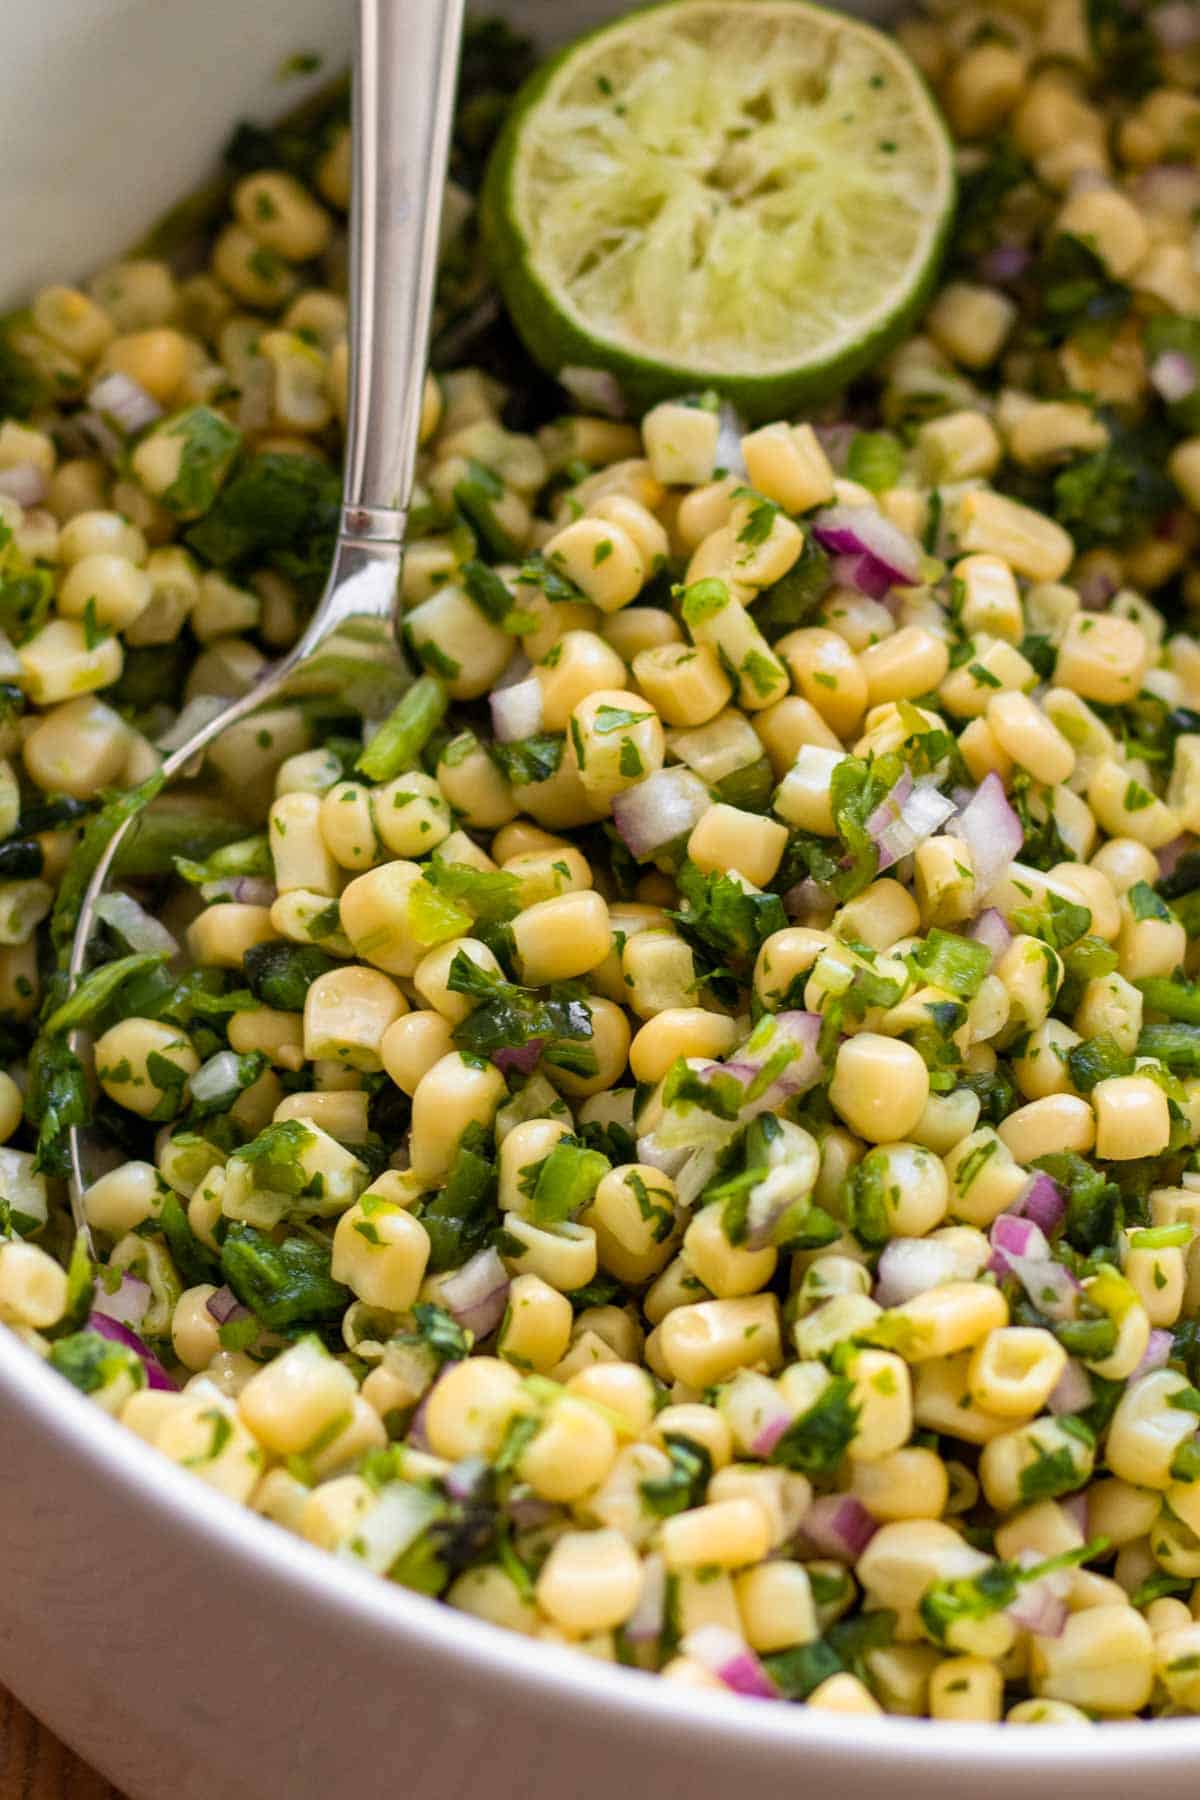 Chili-Corn Salsa with Lime wedge and large spoon.